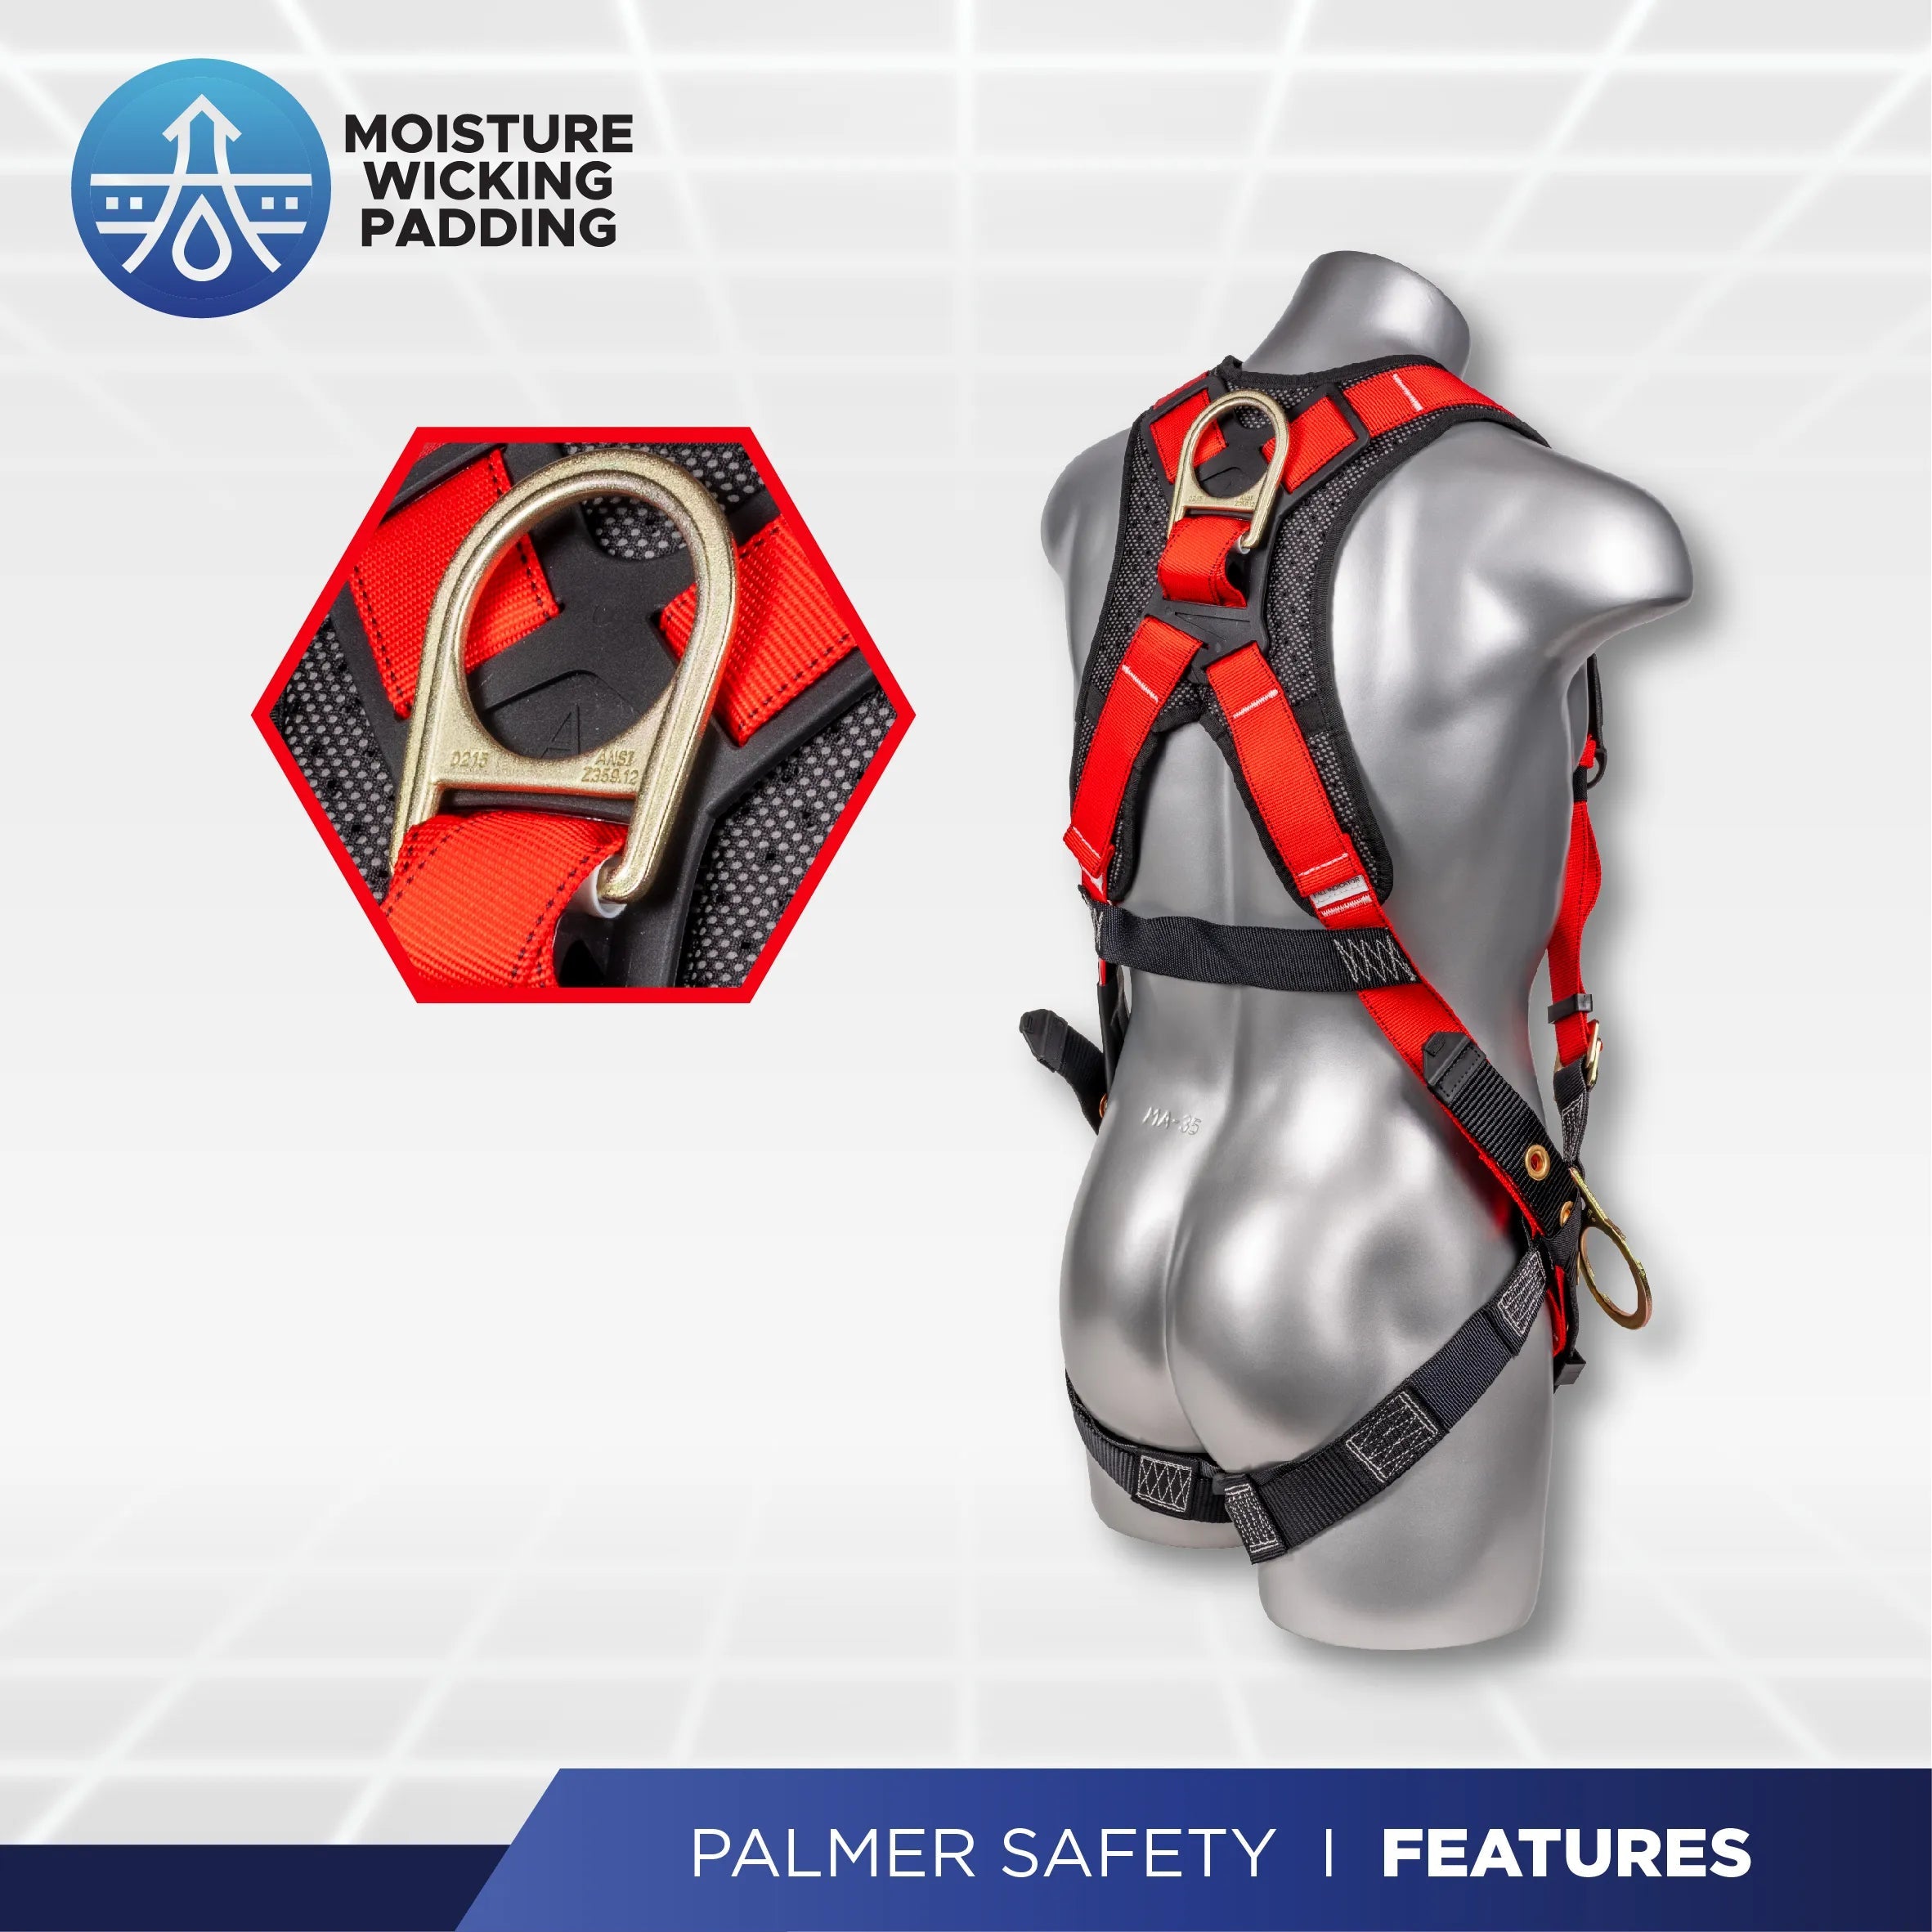 Construction Safety Harness 5 Point, Grommet Legs, Padded Back, Red